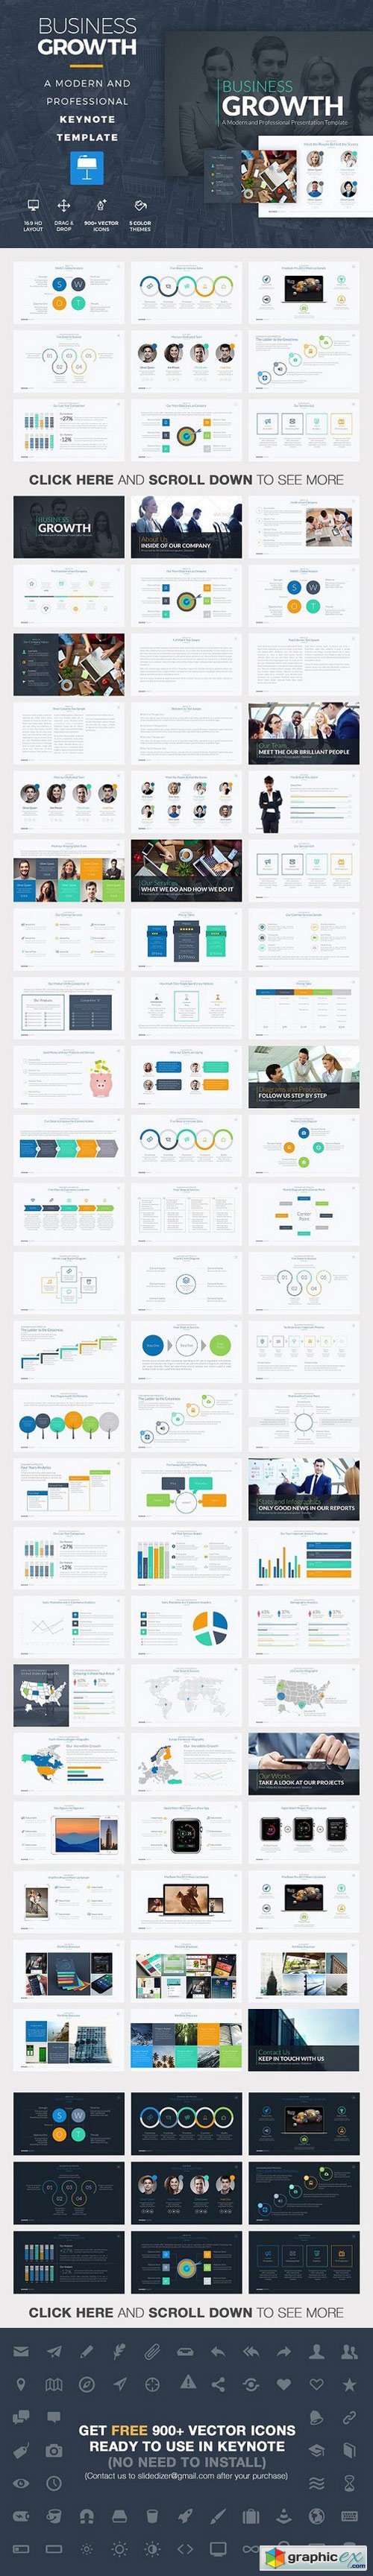 Business Growth Keynote Template